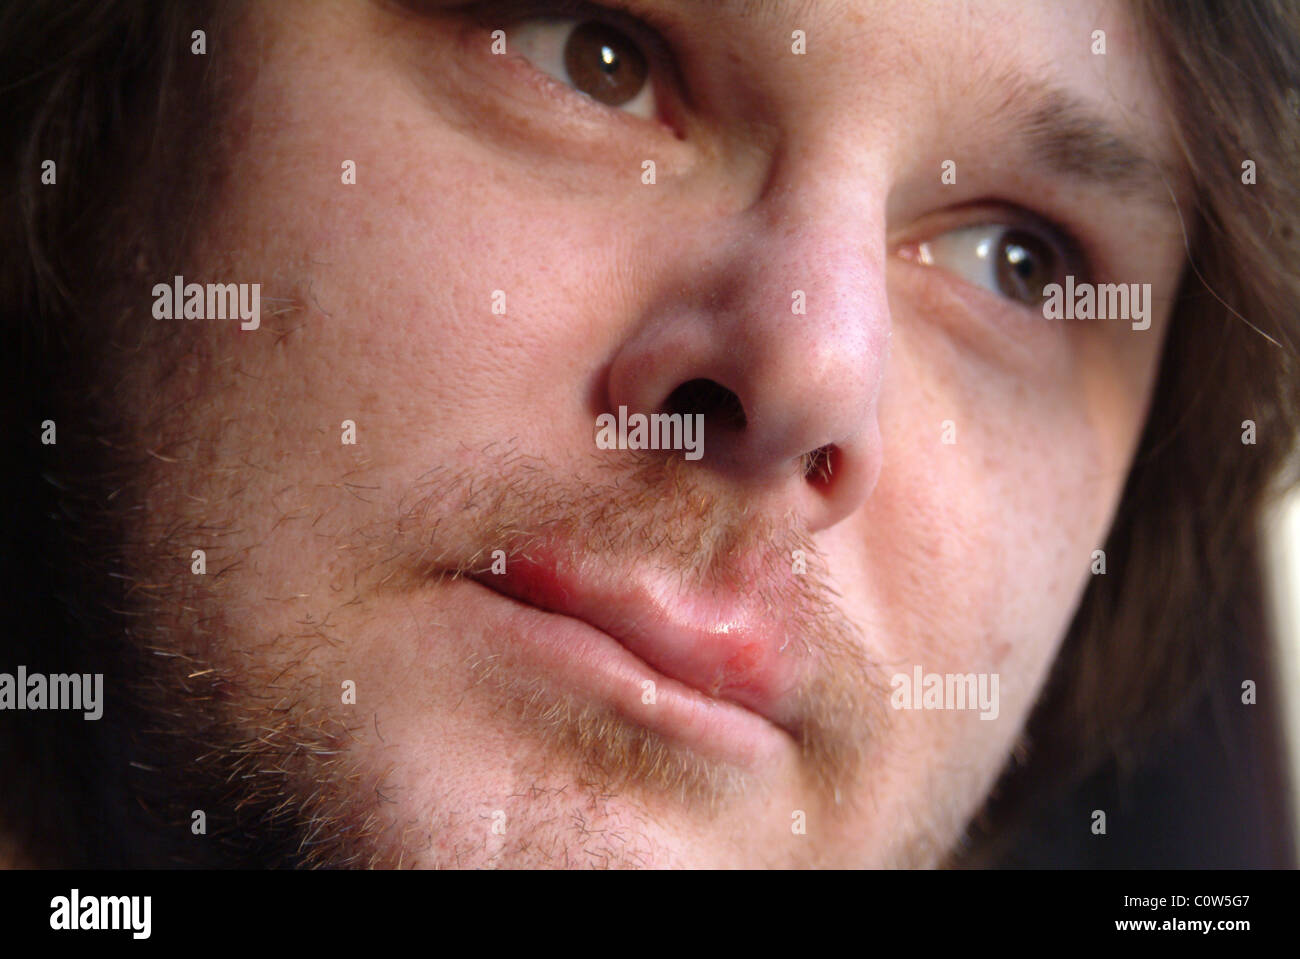 Head shot of a man with cold sores on his lips Stock Photo